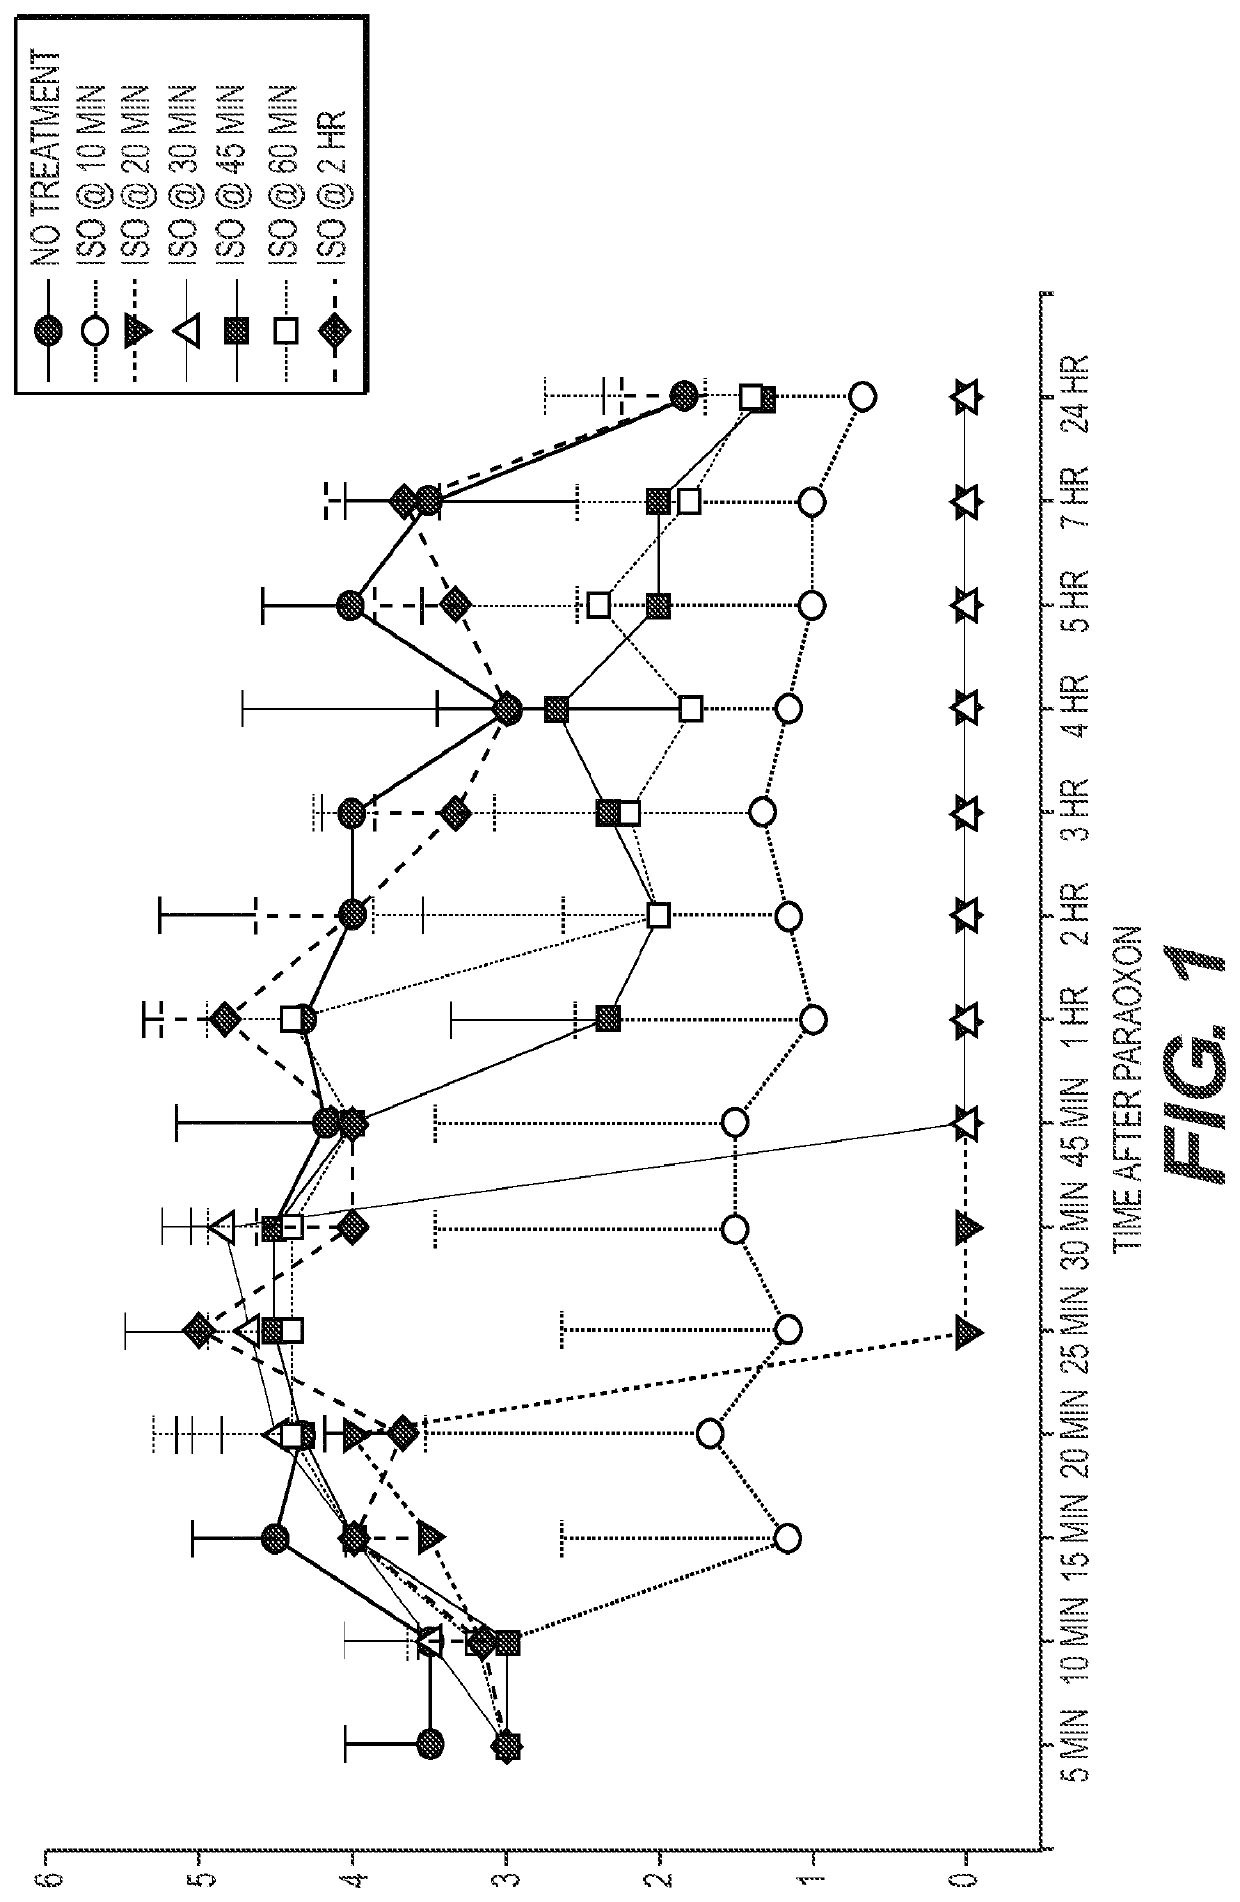 Methods for treating or preventing organophosphate poisoning